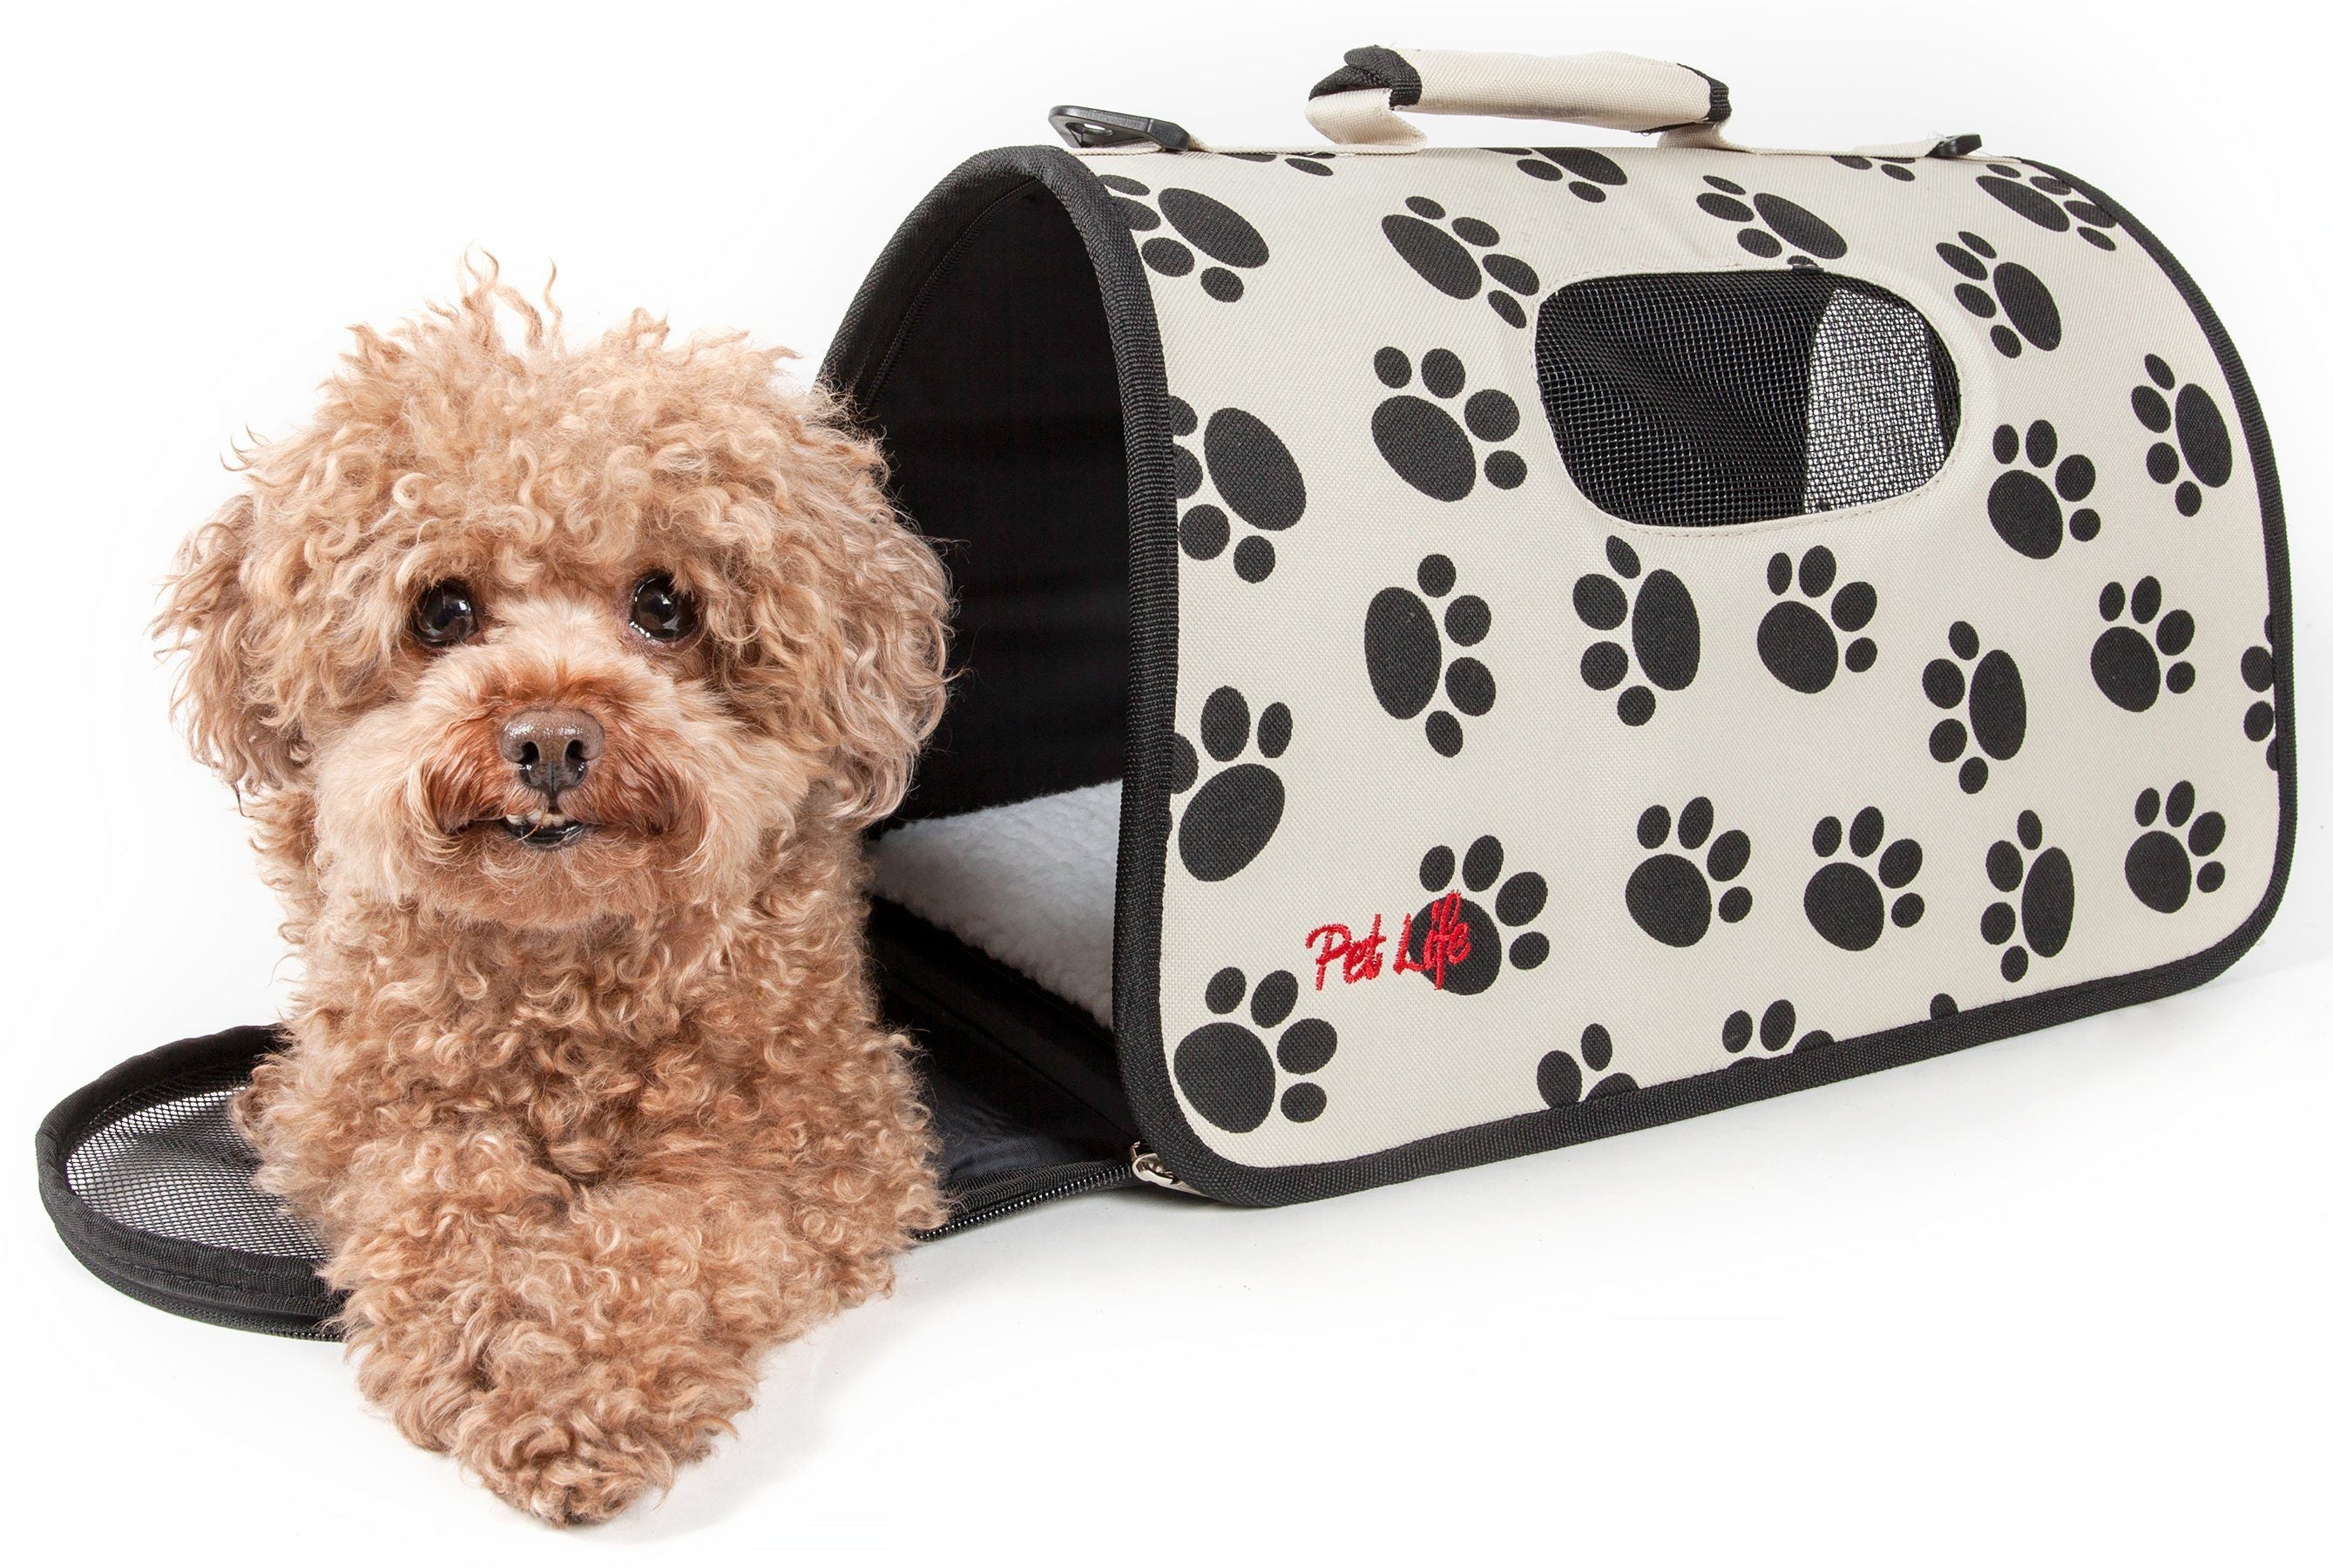 Pet Life ® Paw Patterned Airline Approved Zippered Folding Collapsible Travel Pet Dog Carrier Medium Cream & Black